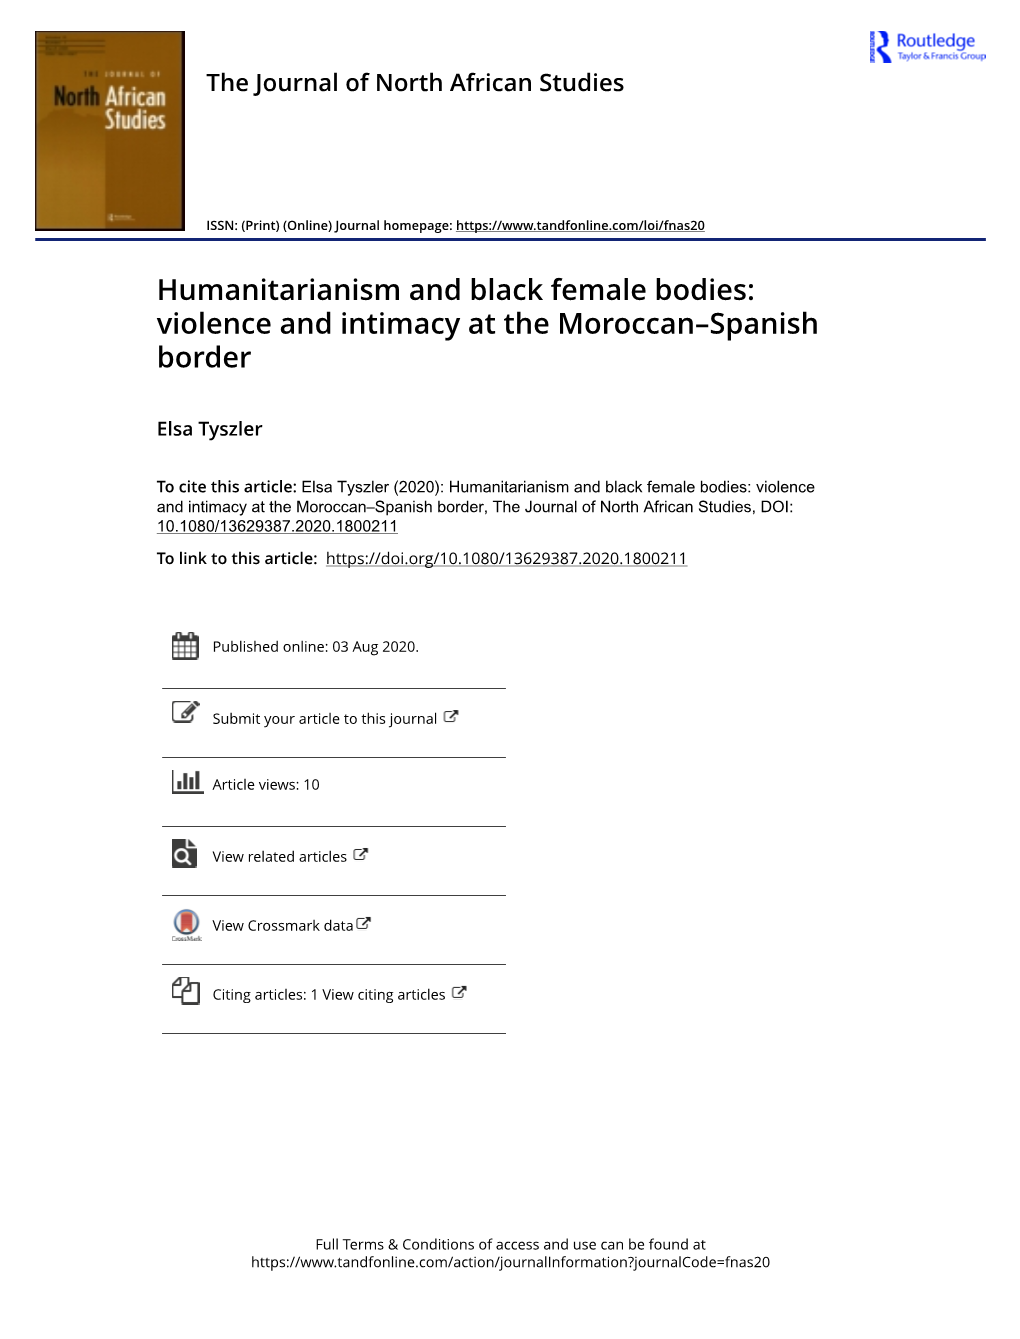 Humanitarianism and Black Female Bodies: Violence and Intimacy at the Moroccan–Spanish Border